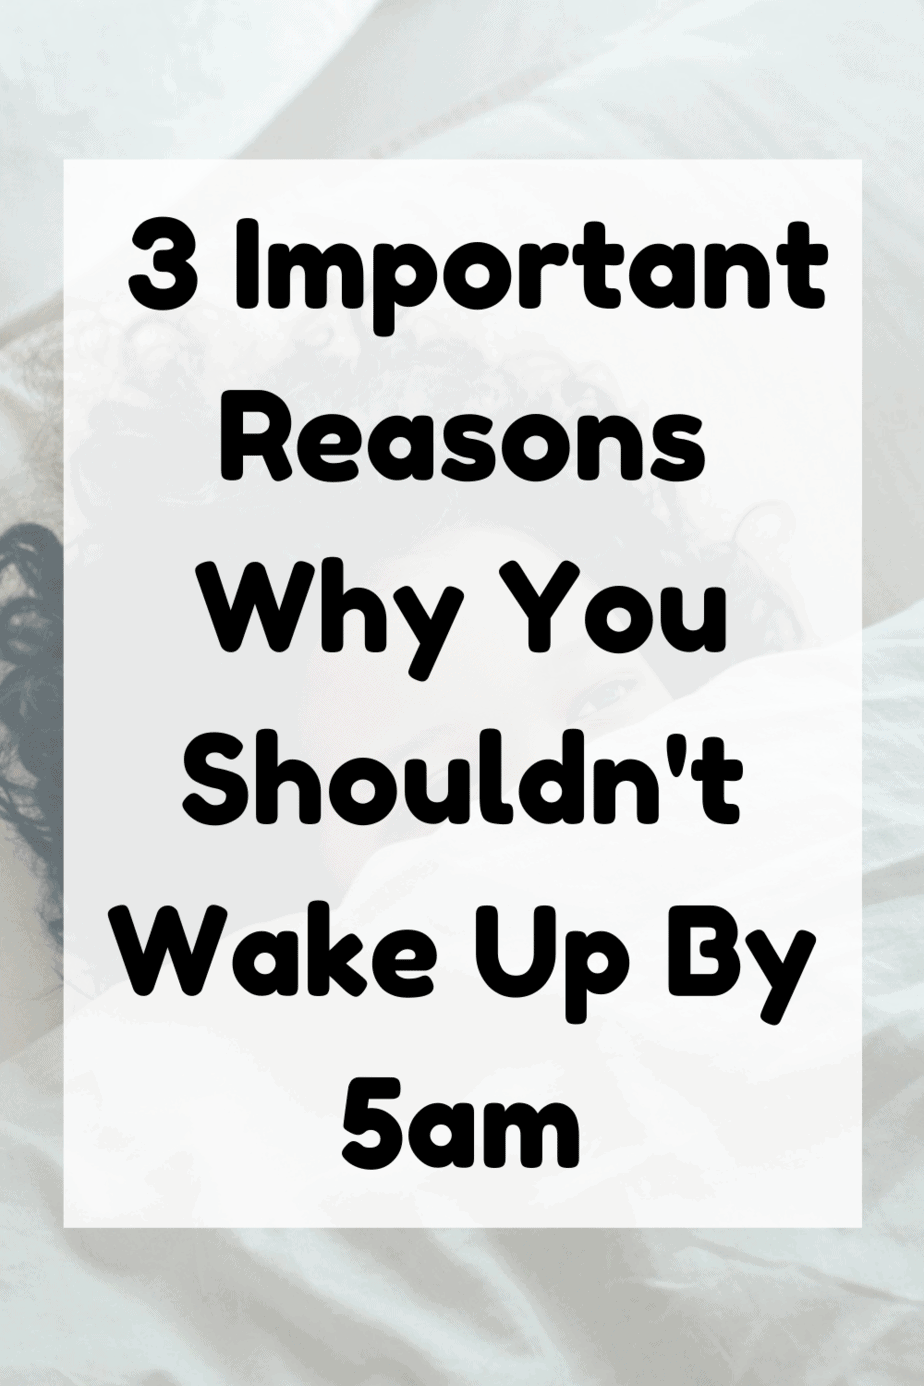 Waking Up By 5 am: 3 Important Reasons Why You Shouldn't